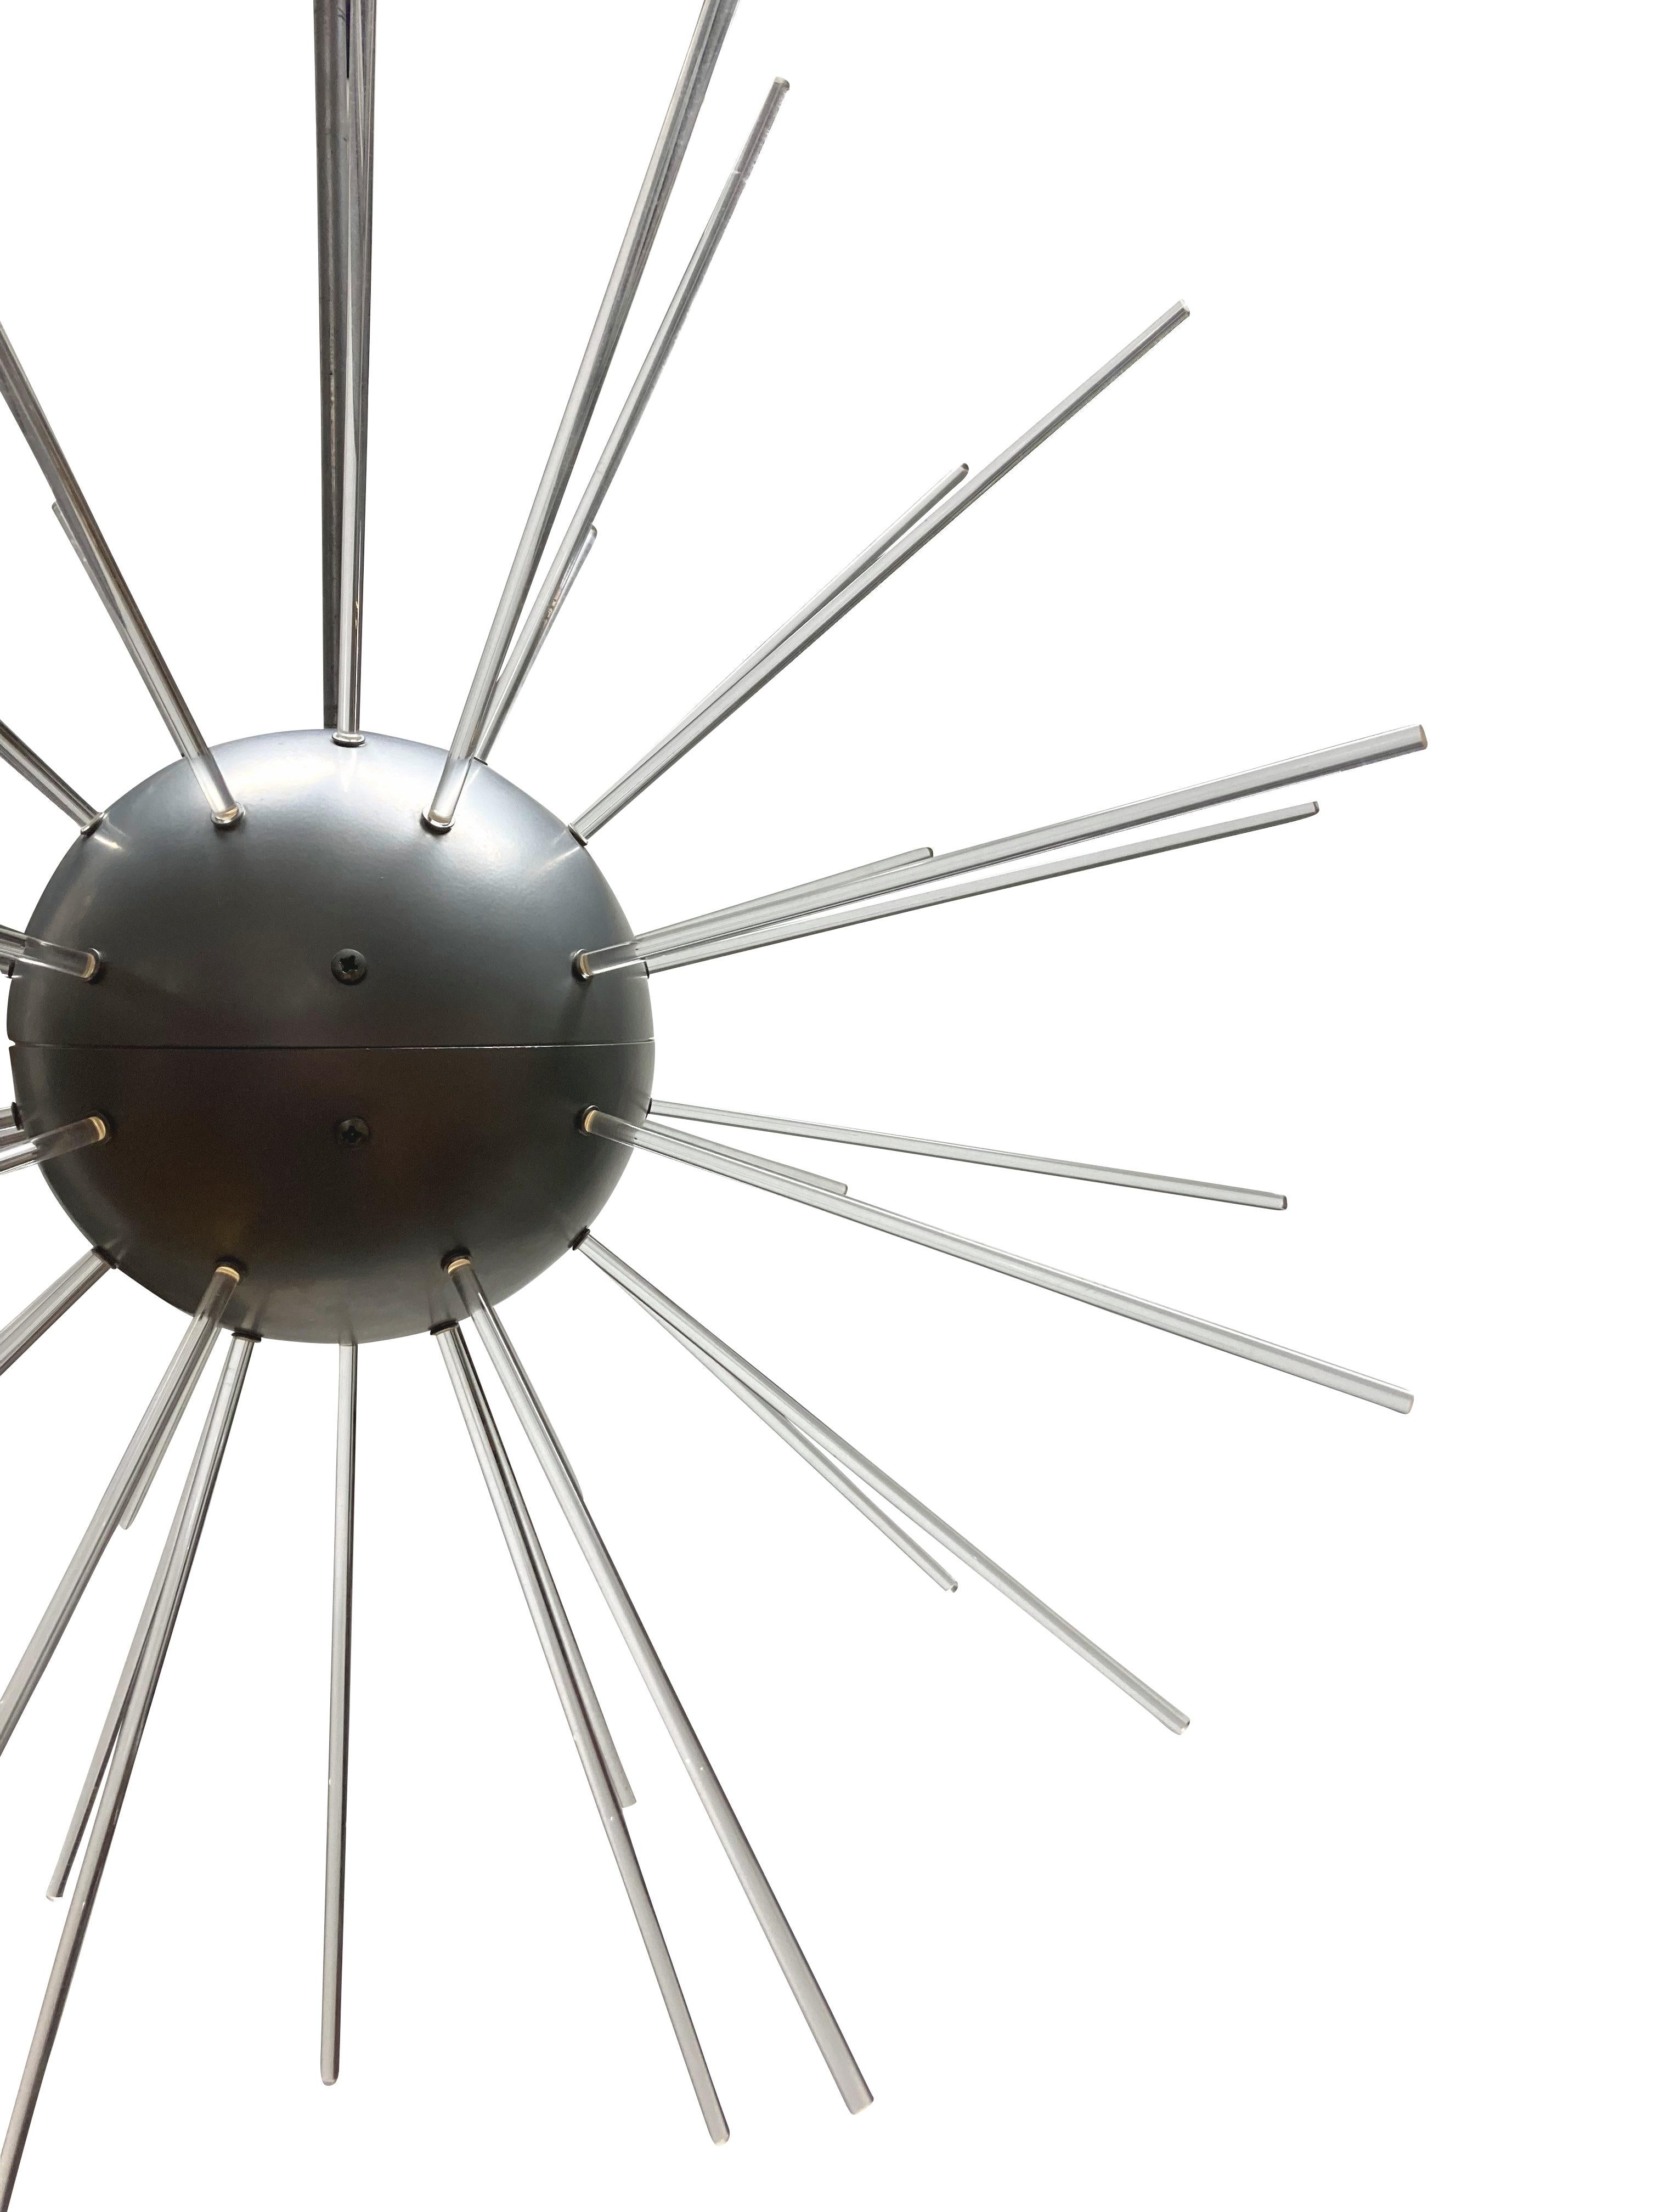 Late 20th Century Rare Pendant Light from the Collection I Soli Alchimea, by Alessandro Guerriero